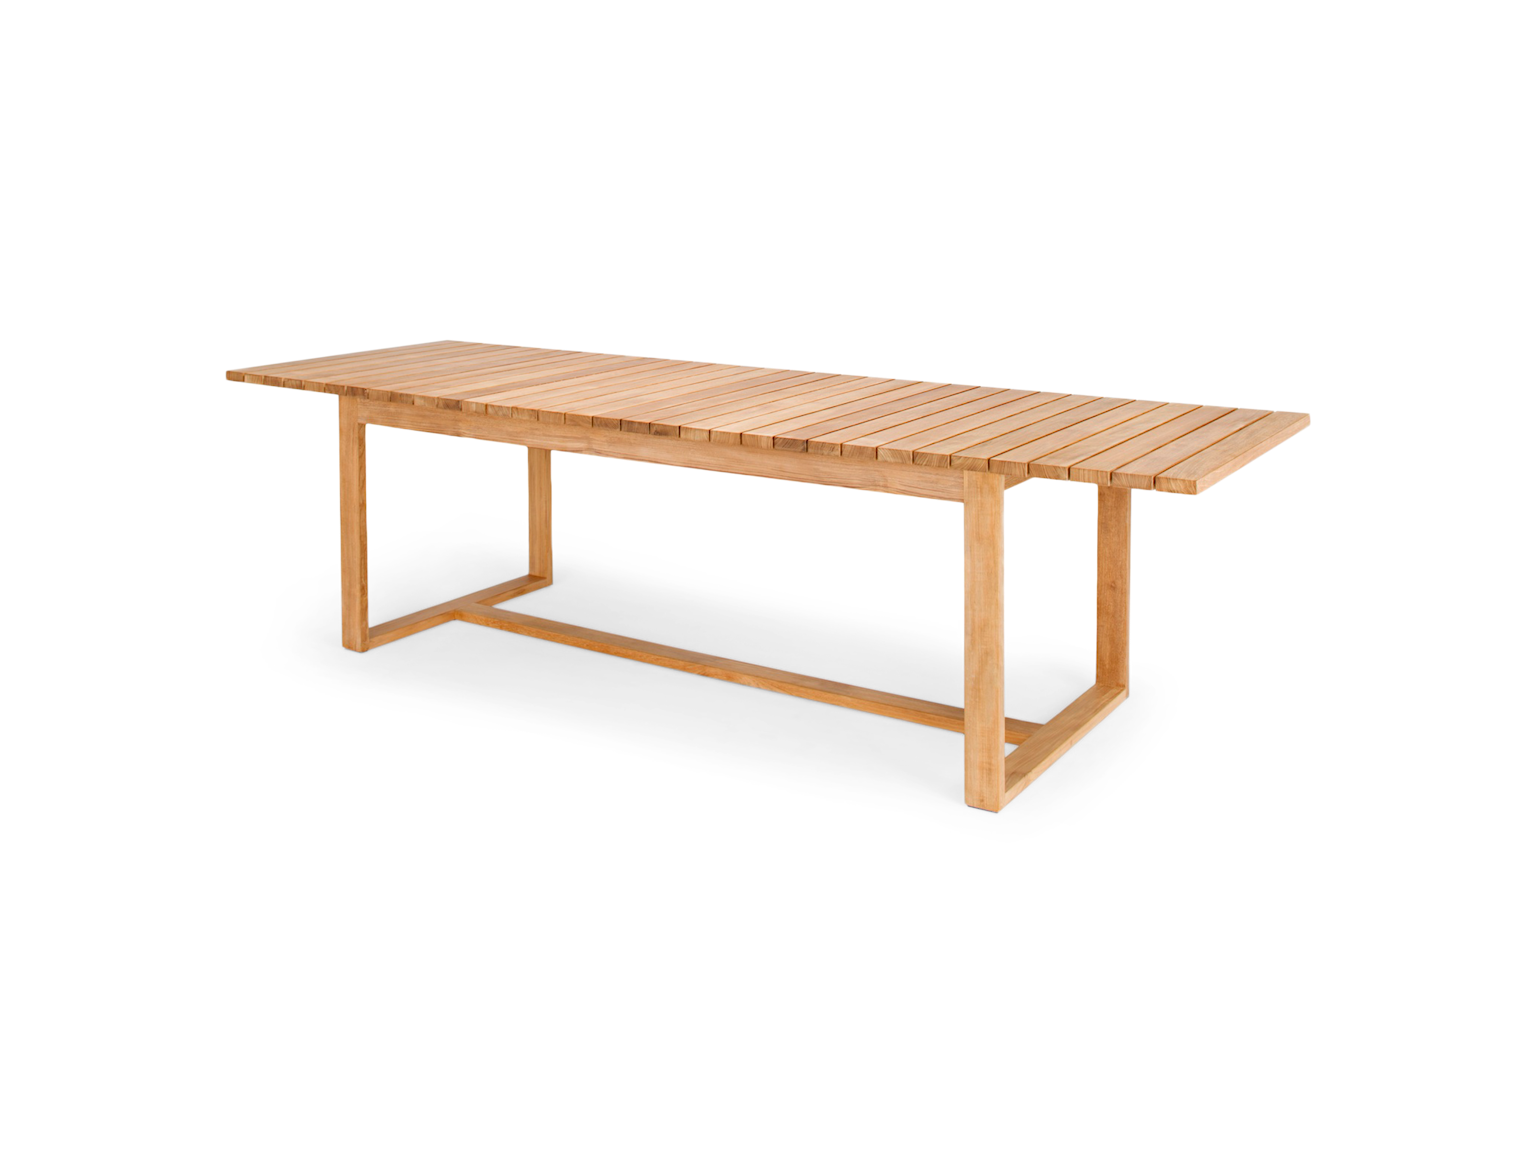 Bremer Outdoor Dining table will extend as you require more seating